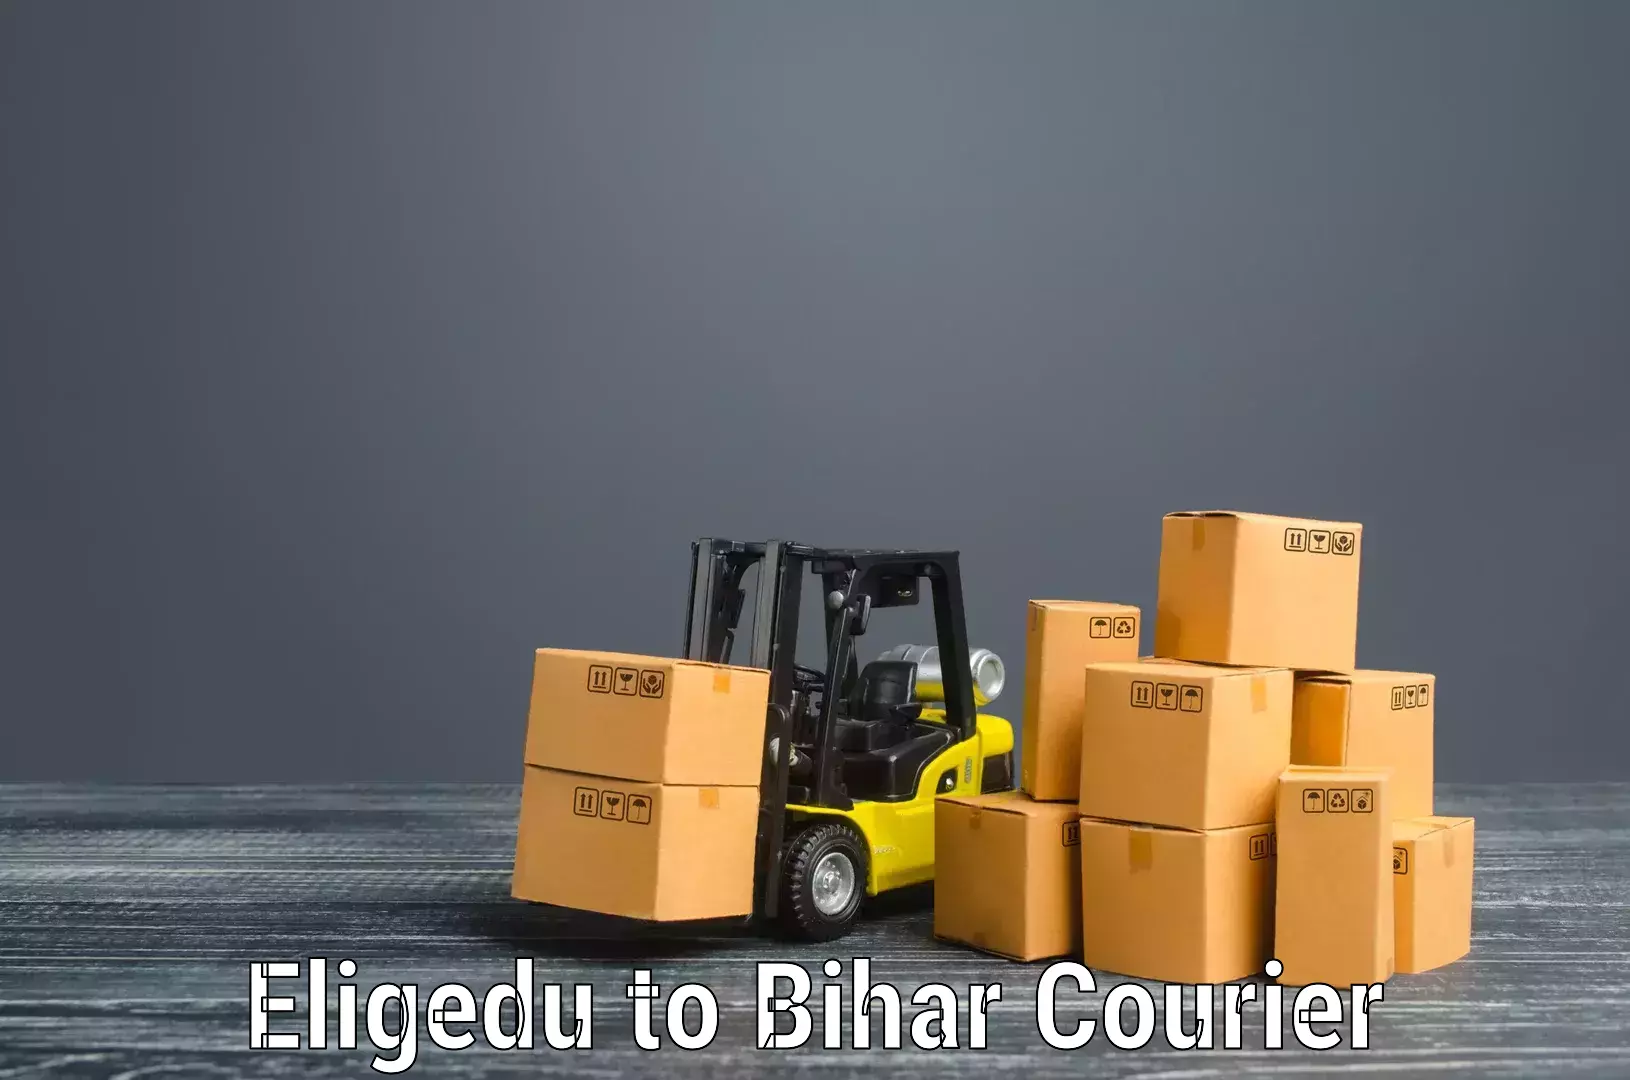 Expert goods movers Eligedu to Barachati